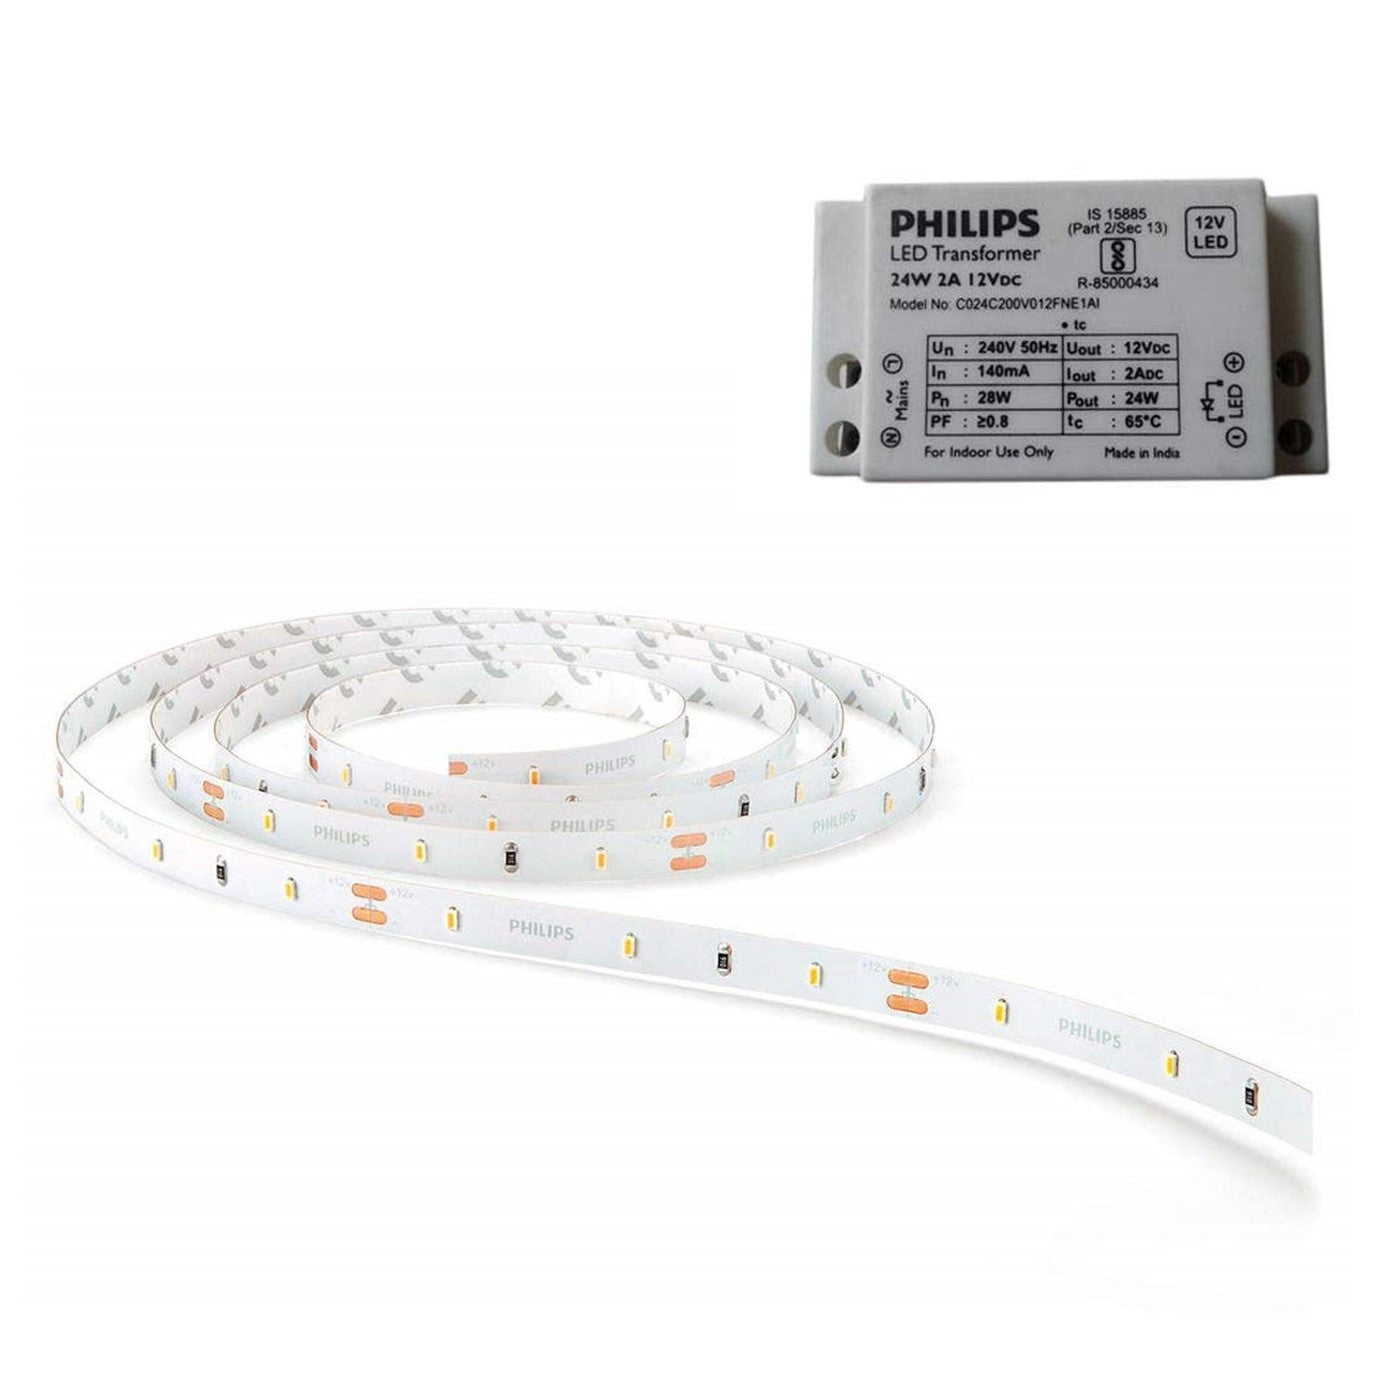 PHILIPS COVE GLOW 25 WATT LED STRIP LIGHT 60 LED PER METER WARM WHITE  YELLOW WITHOUT DRIVER PH1229